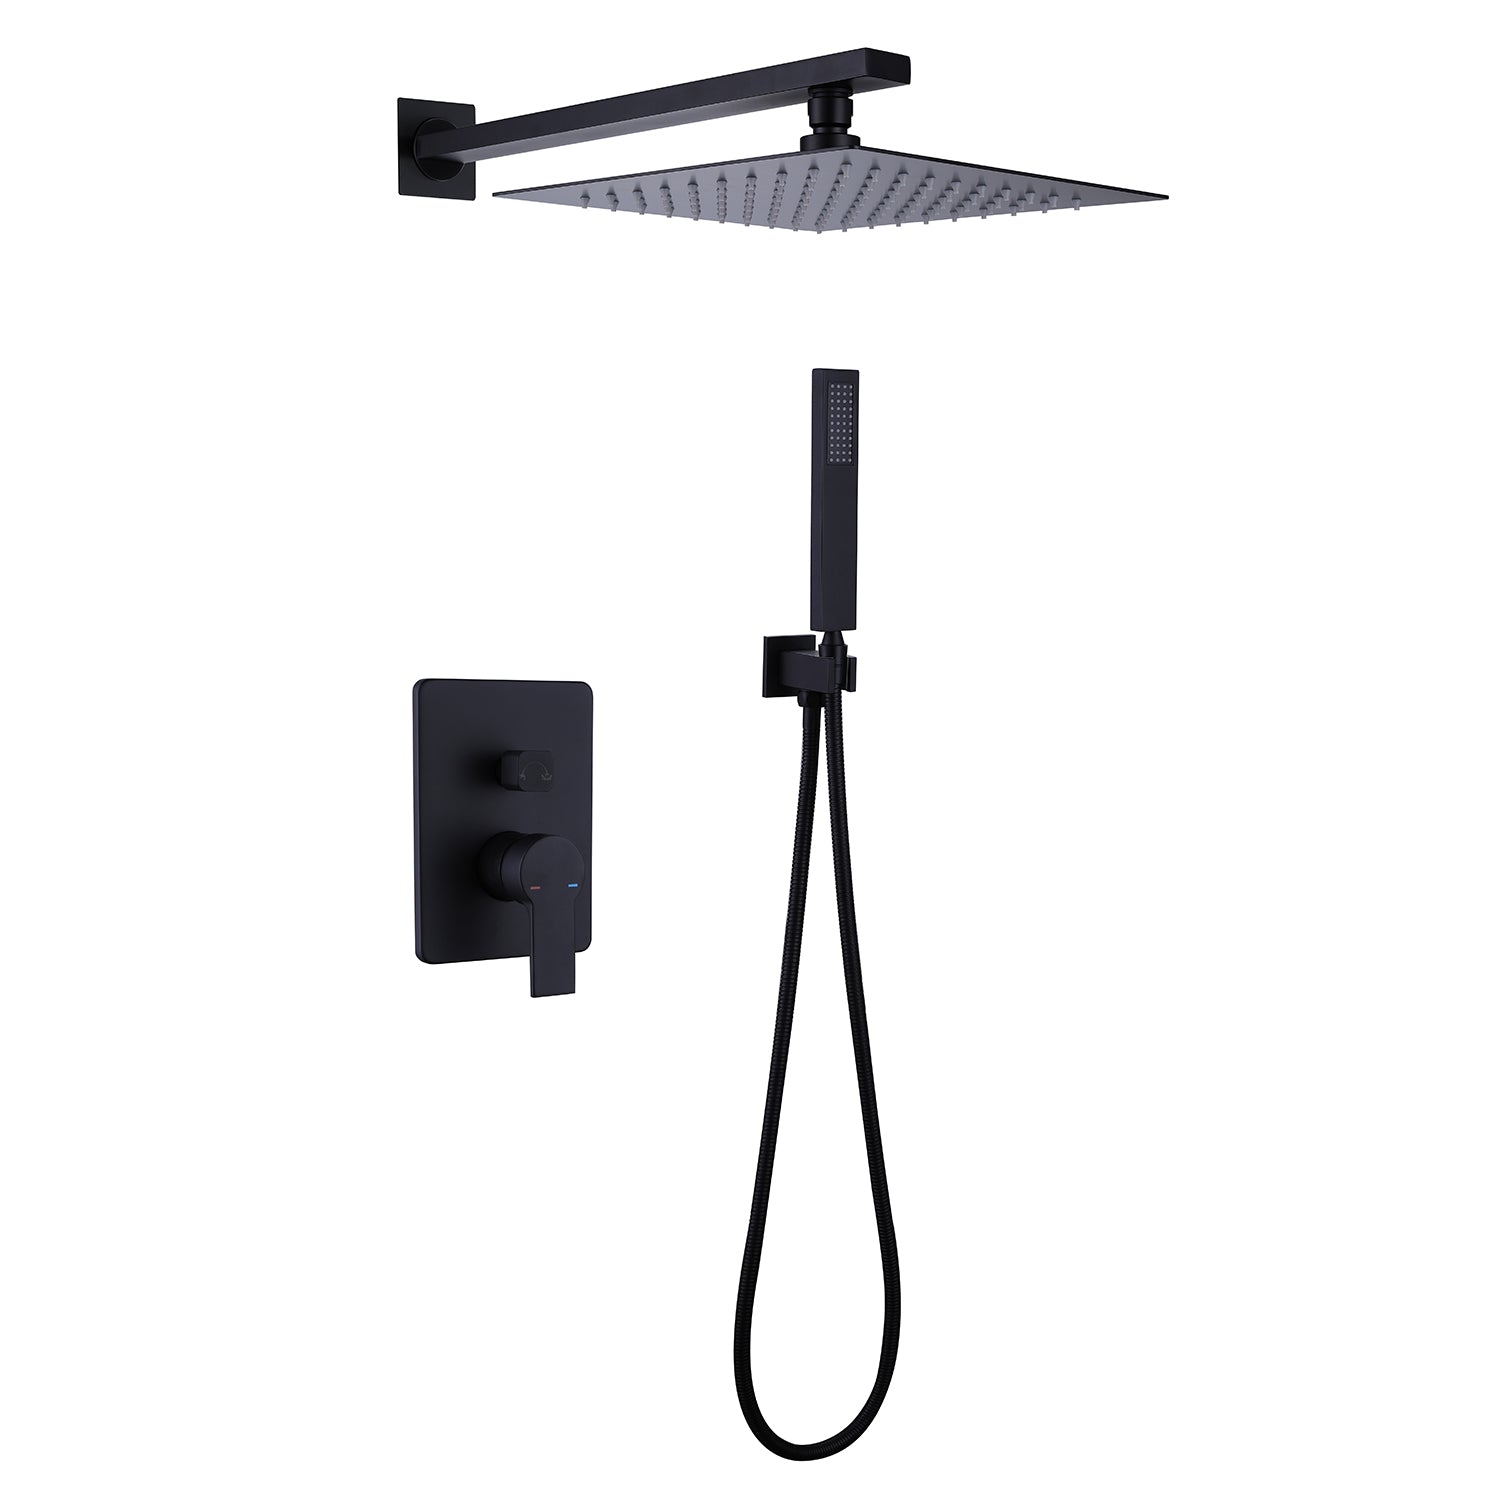 Boyel Living 10 in. Square Shower System Bathroom Shower Towers with Hand-Shower in Black-Boyel Living